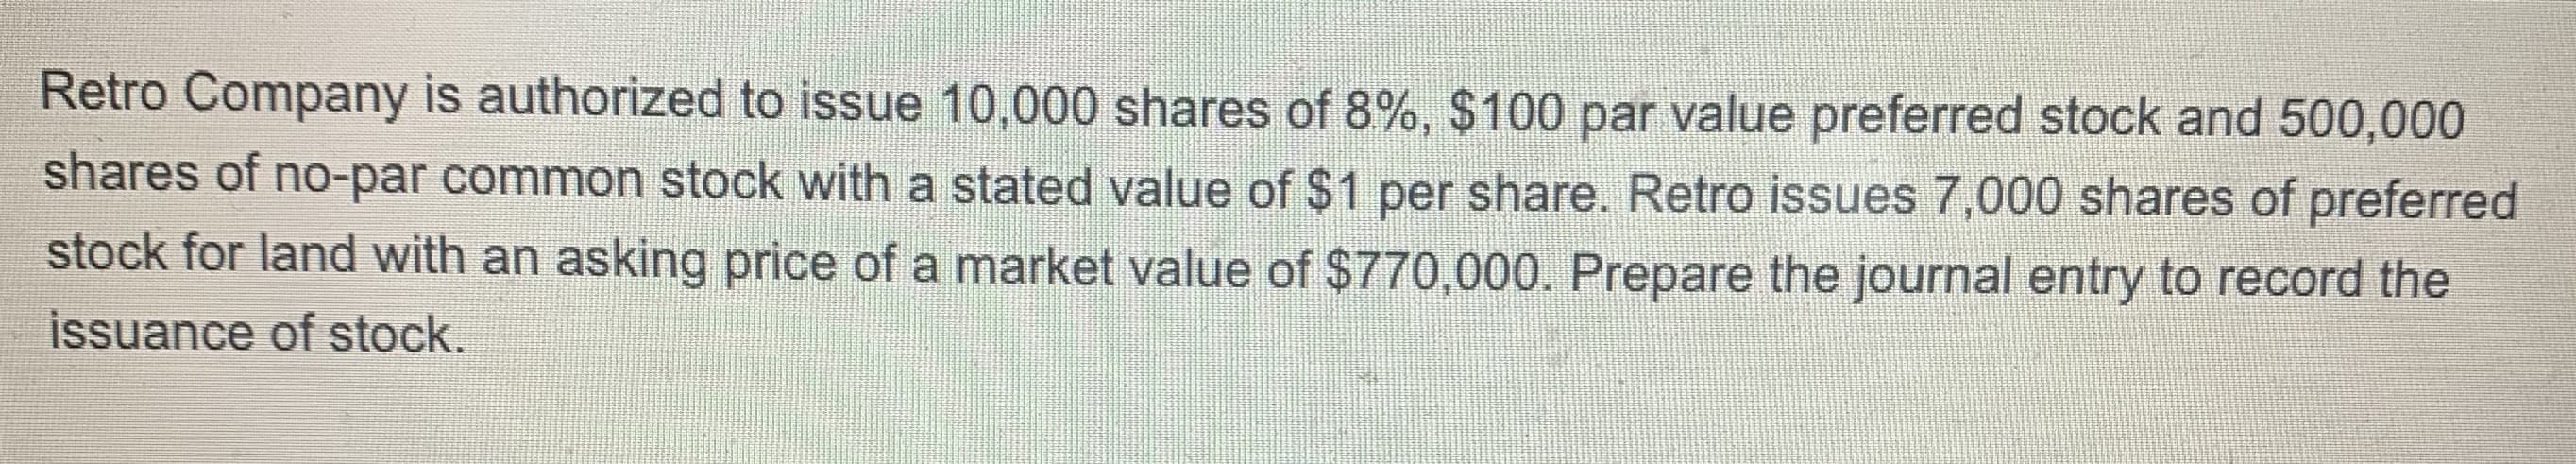 Retro Company is authorized to issue 10,000 shares of 8%, $100 par value preferred stock and 500,000
shares of no-par common stock with a stated value of $1 per share. Retro issues 7,000 shares of preferred
stock for land with an asking price of a market value of $770,000. Prepare the journal entry to record the
issuance of stock.
